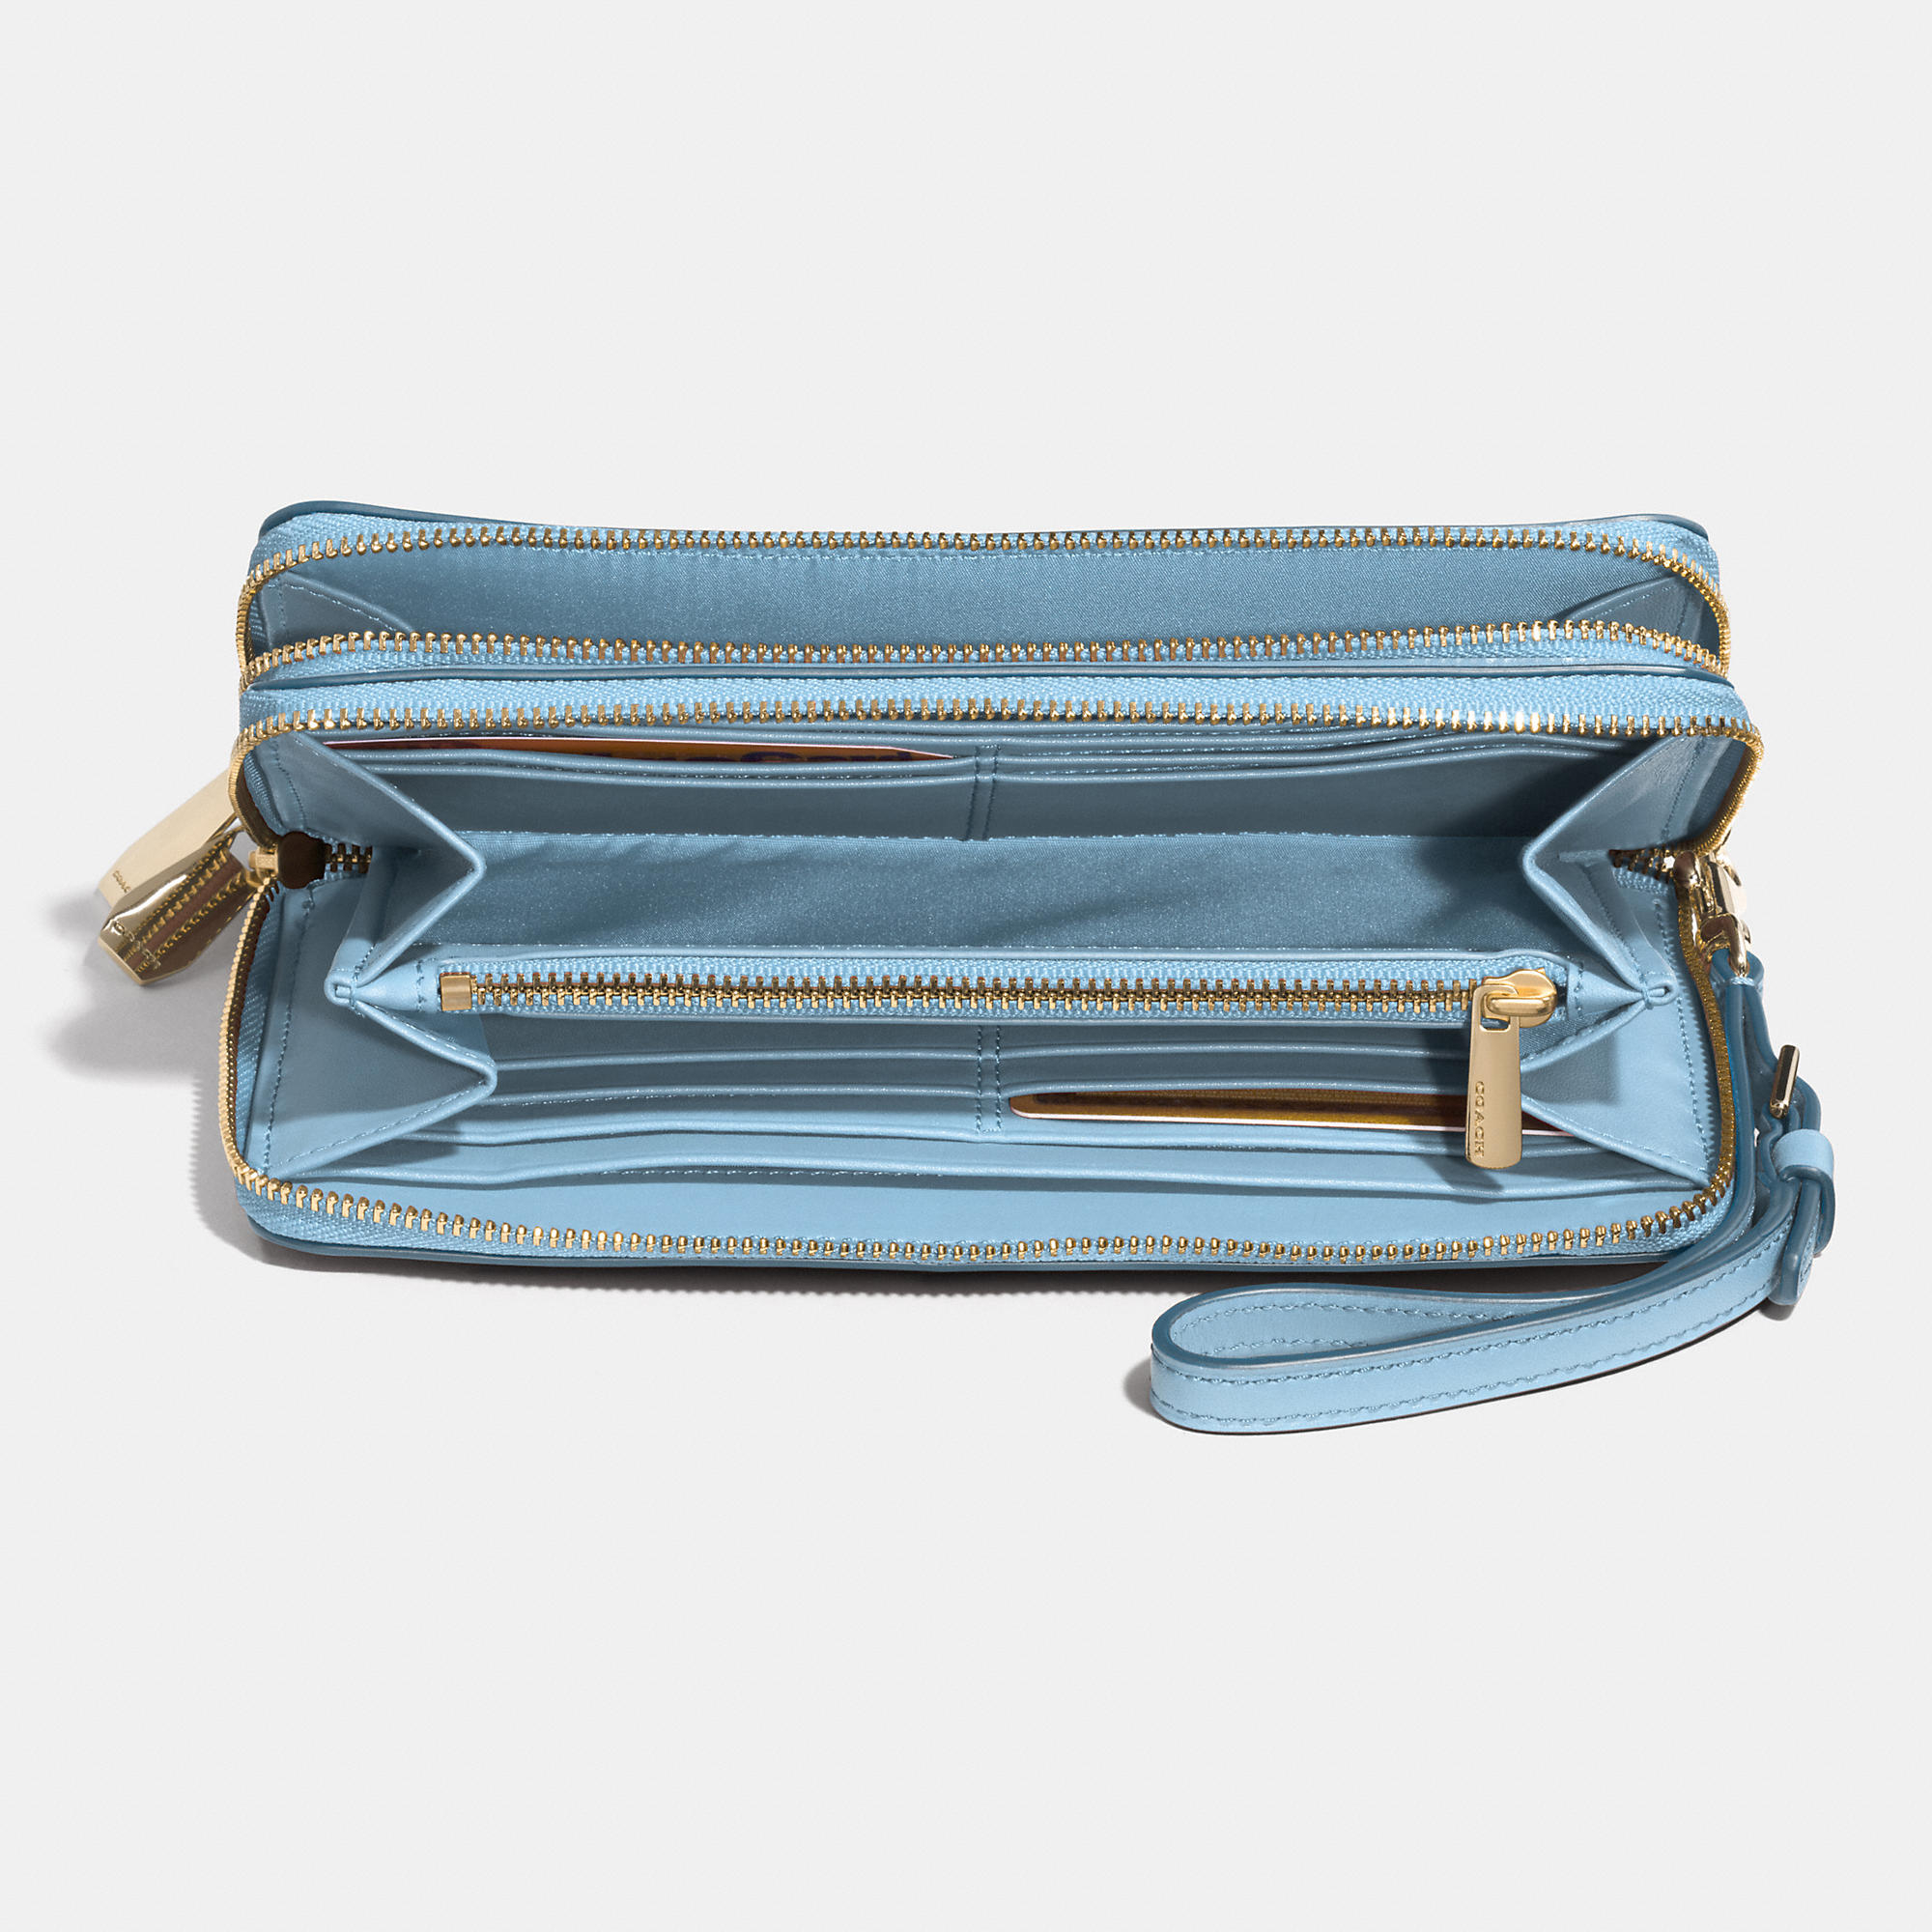 COACH Madison Double Accordion Zip Wallet In Leather in Light Gold/Pale Blue (Blue) - Lyst